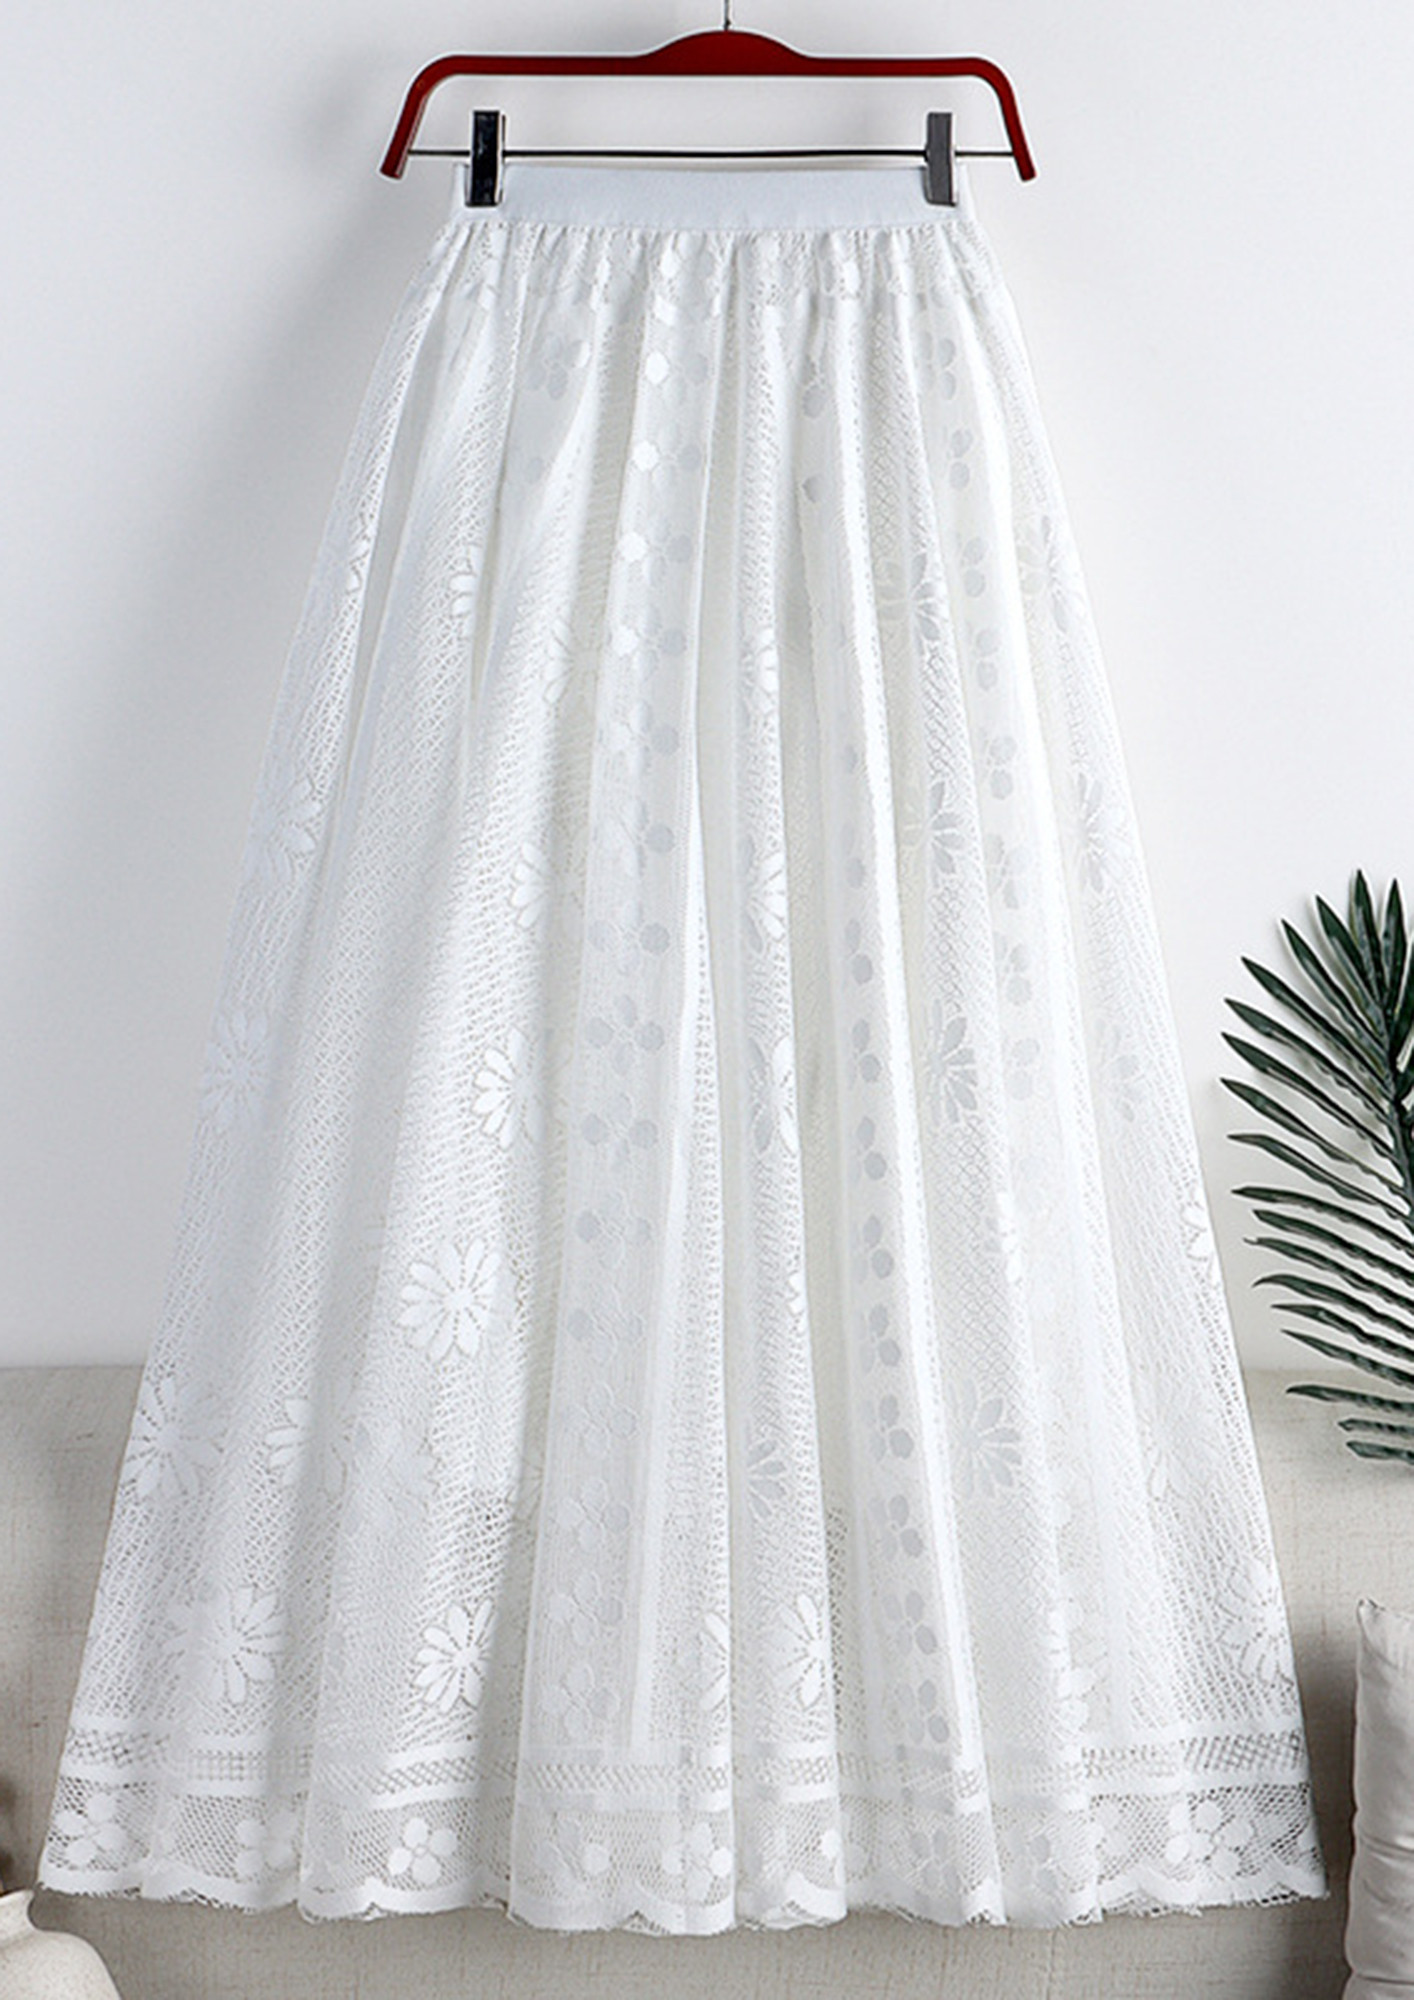 DITSY PRINTED WHITE LACE SKIRT